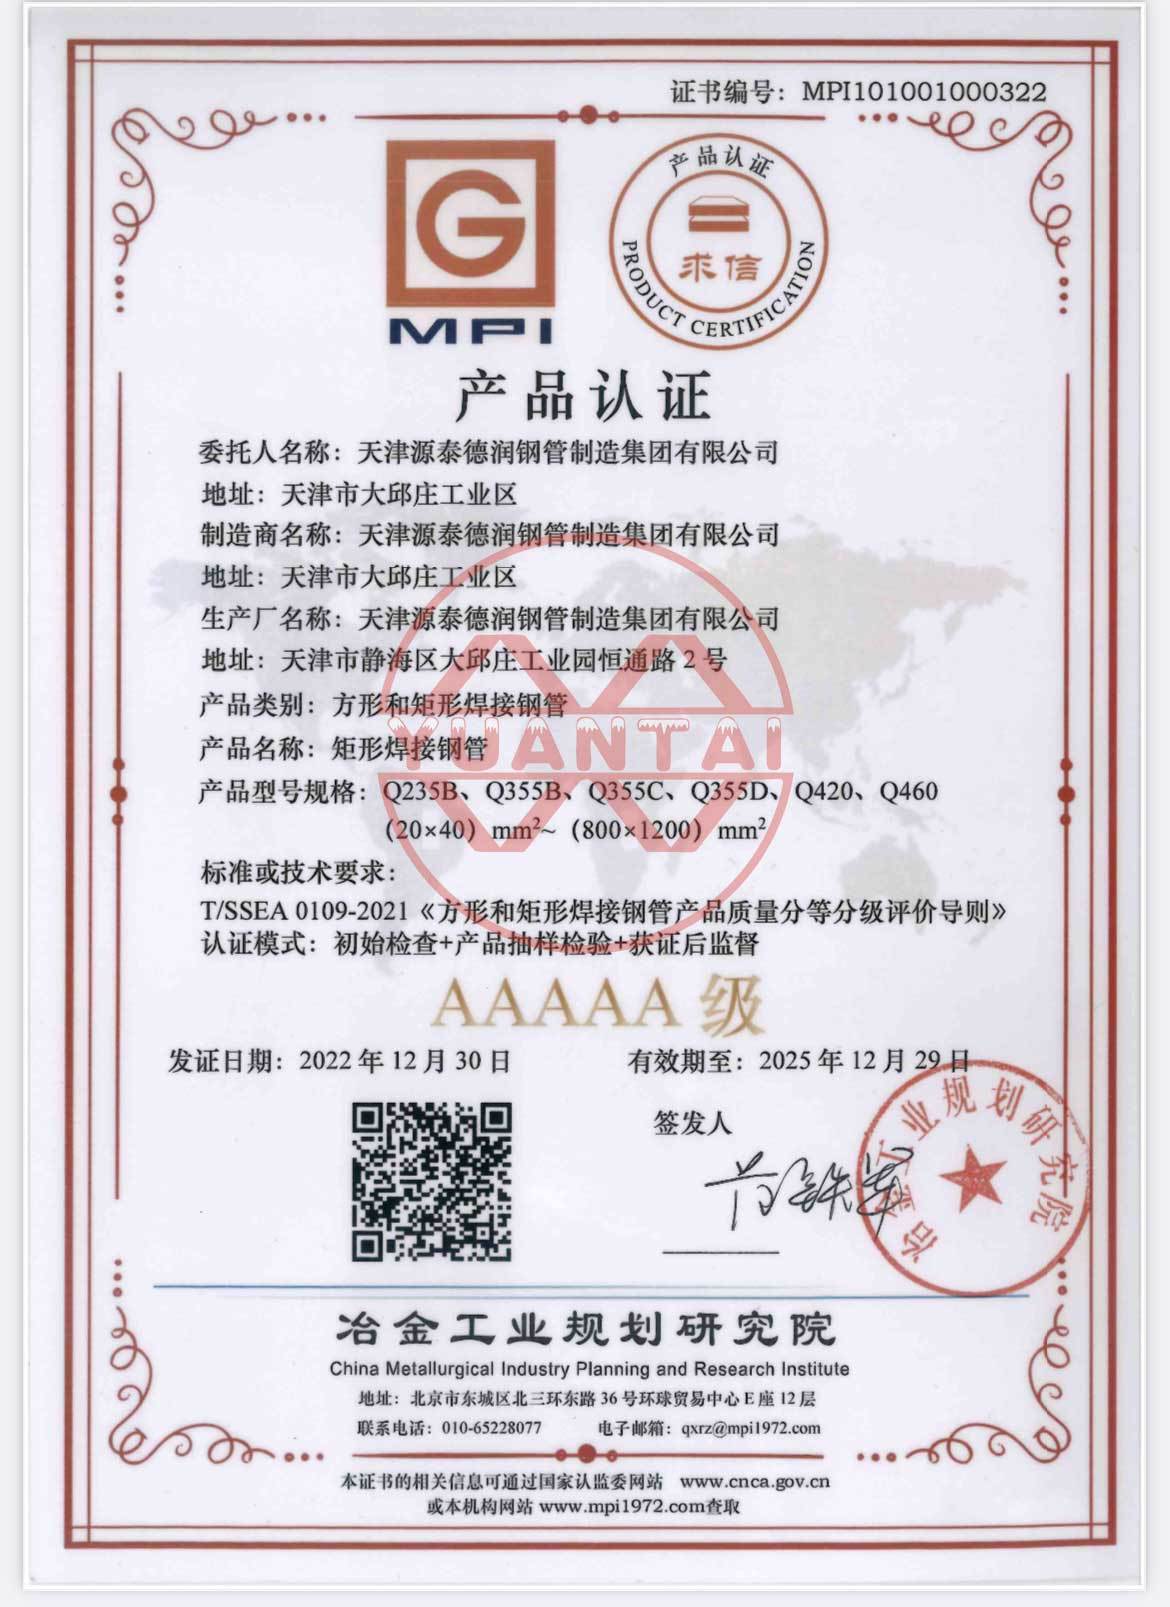 Tianjin Yuantai derun Group square and rectangular welded steel pipe obtained the AAAAA product certification of metallurgical Industry Planning and Research Institute